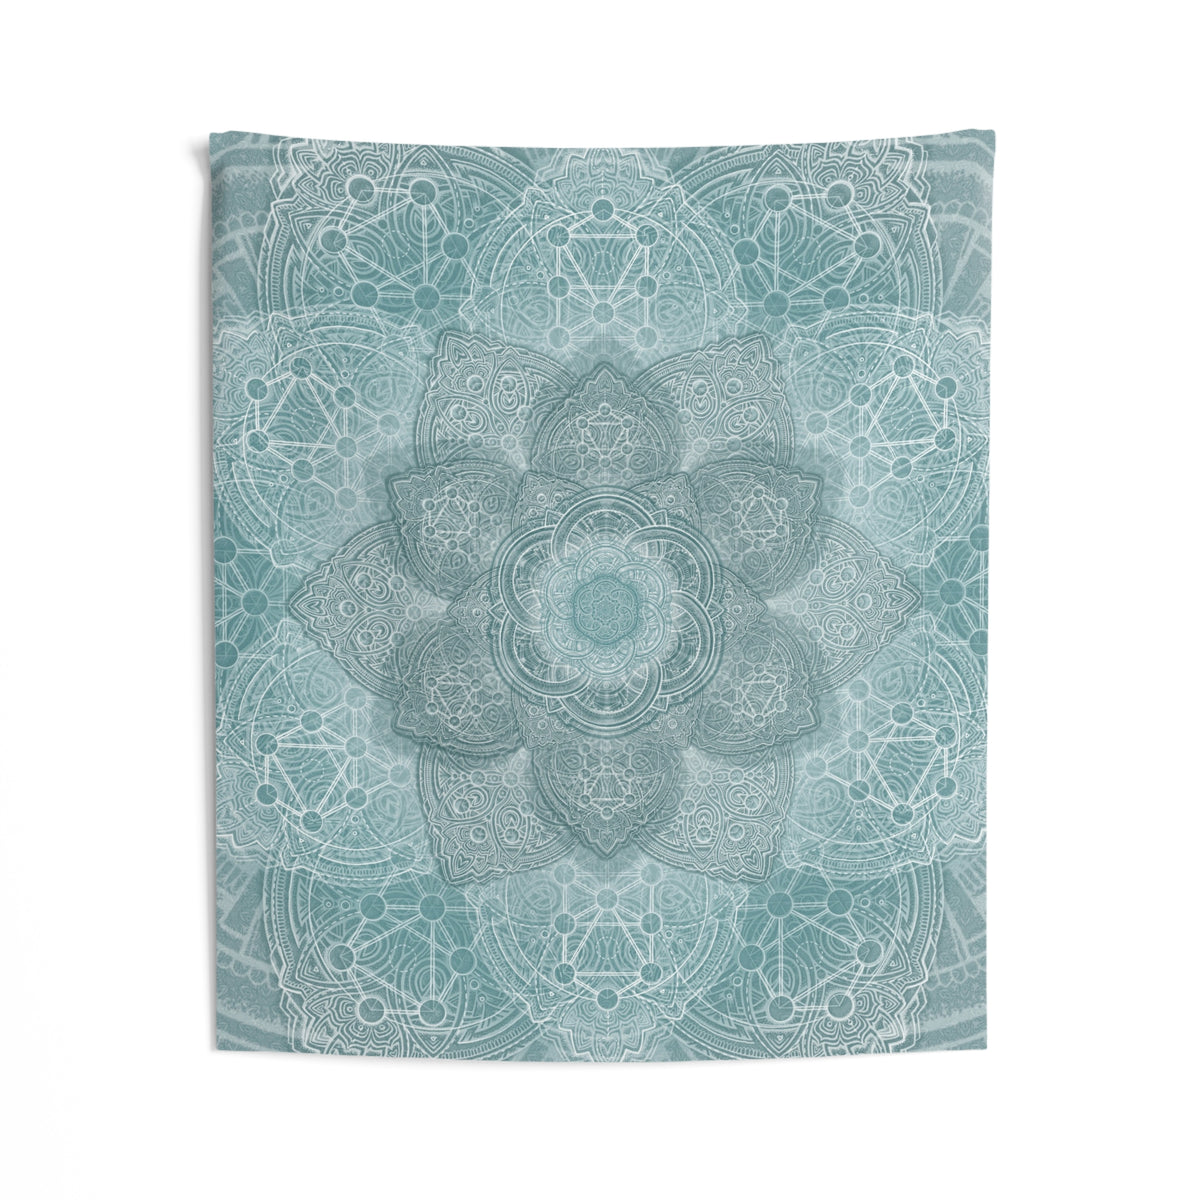 Blue Flower of Life  - Wall Tapestry